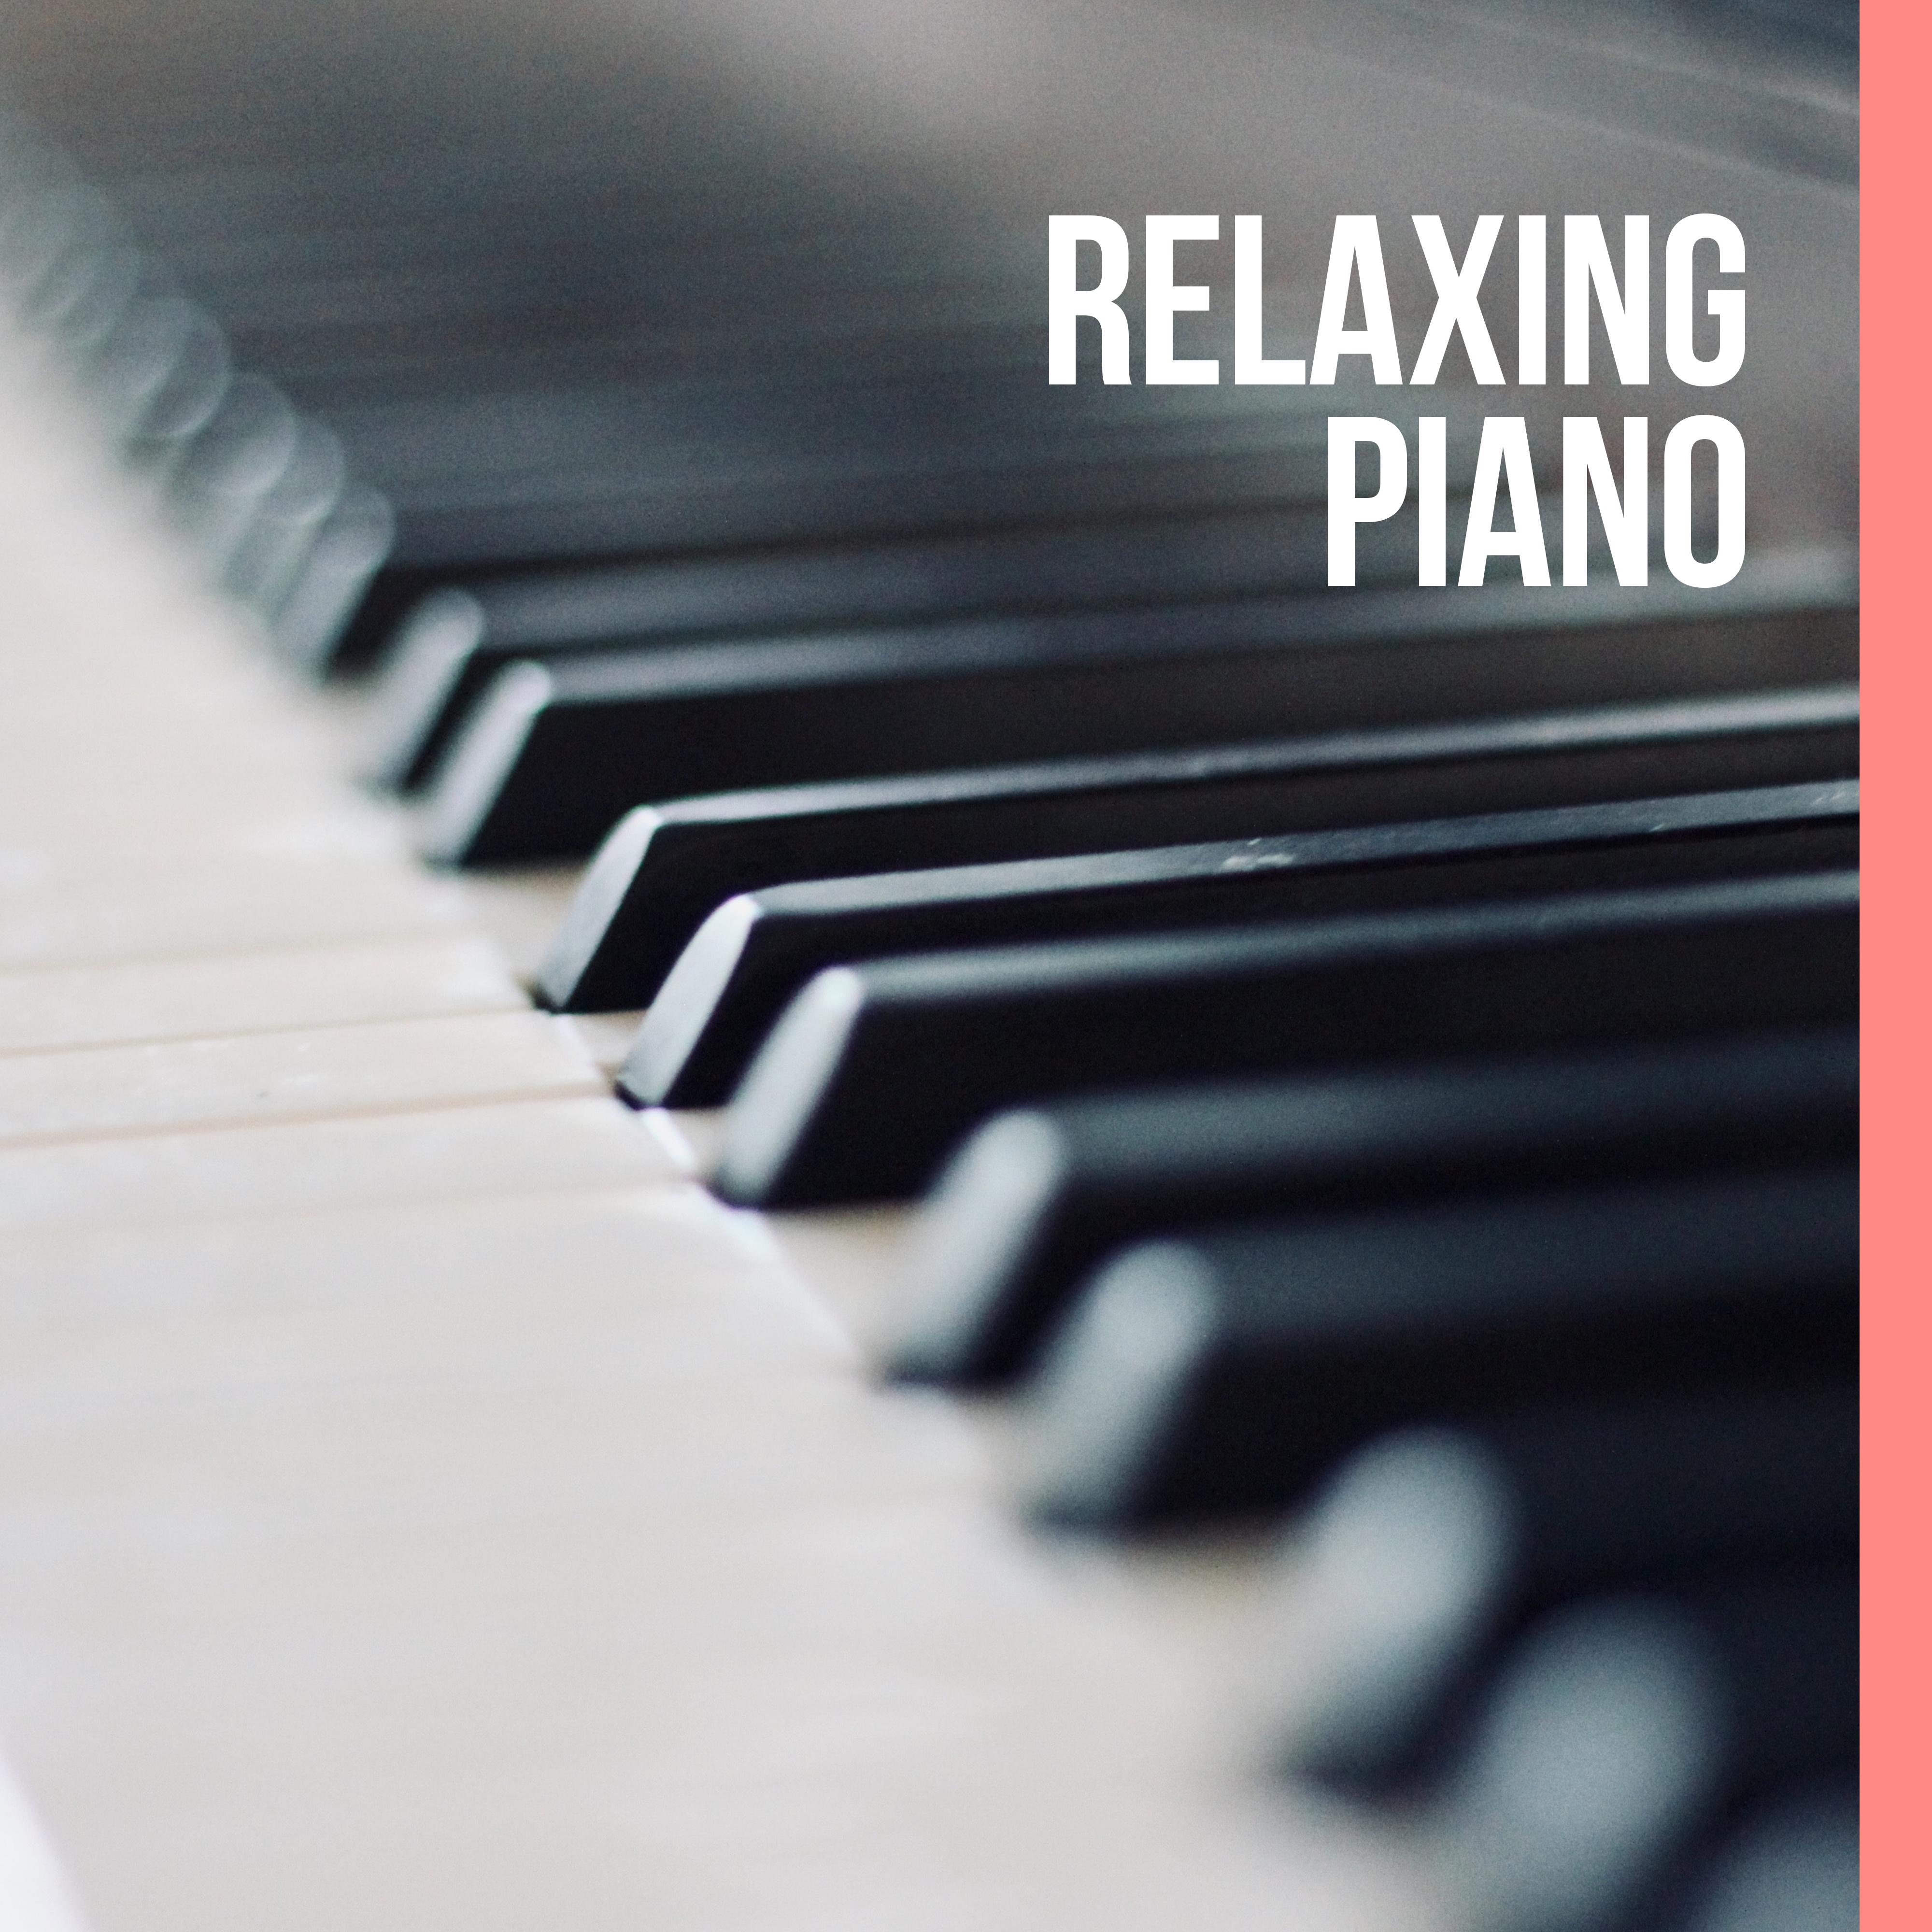 Relaxing Piano – 15 Beautiful Instrumental Songs, Jazz Relaxation, Piano Music, Classical Jazz to Relax